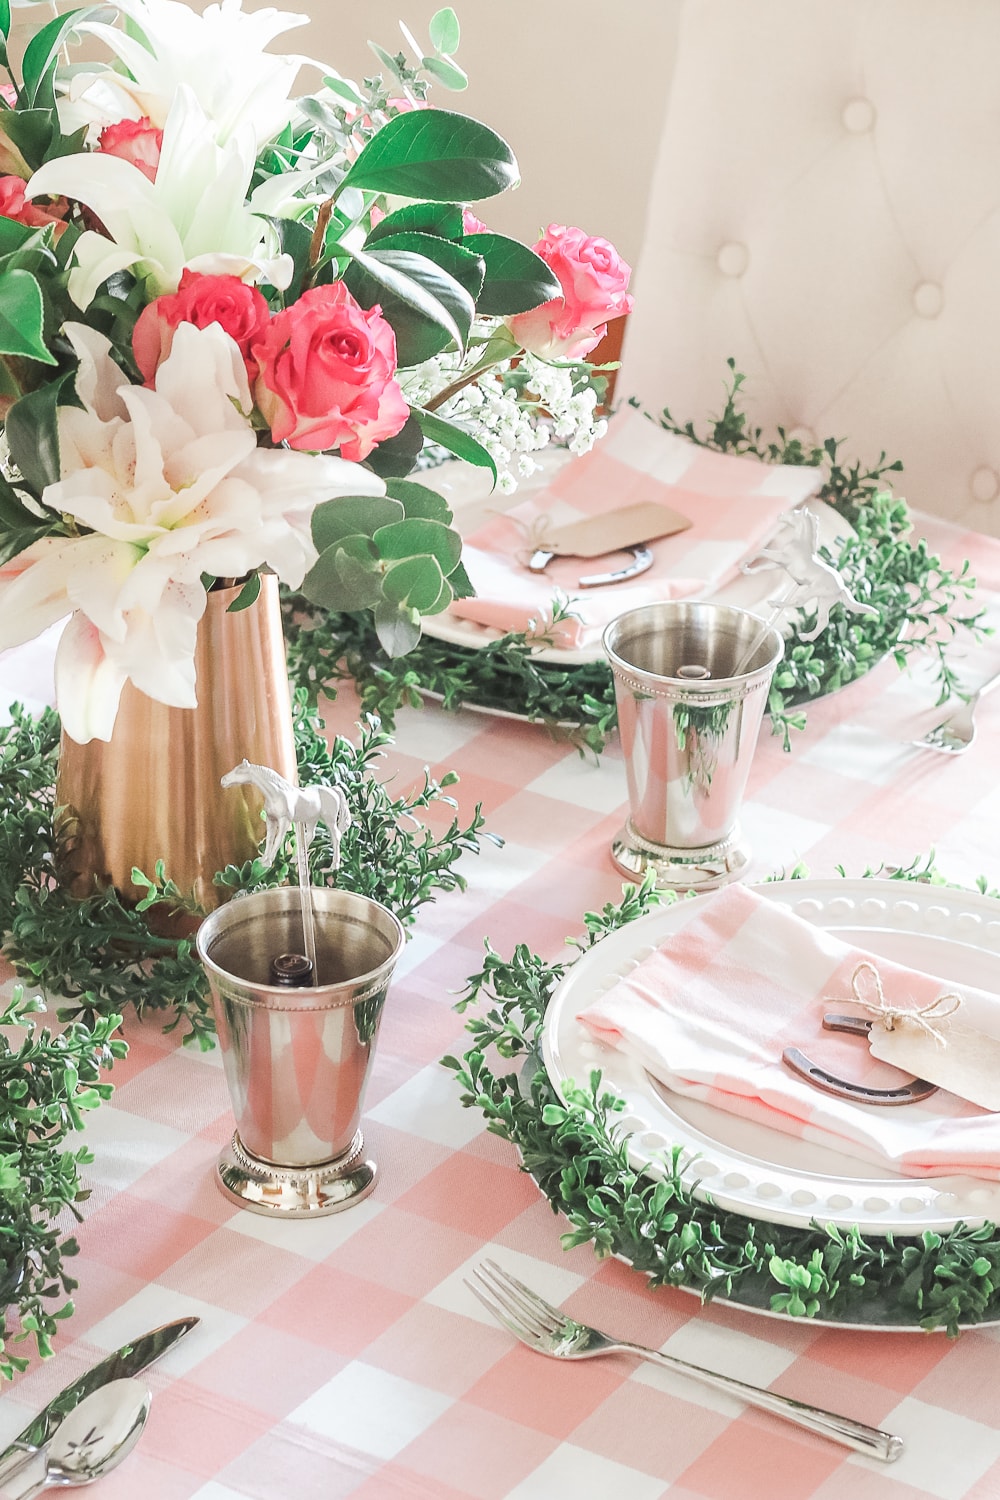 Derby Day table decorations designed by entertaining blogger Stephanie Ziajka on Diary of a Debutante